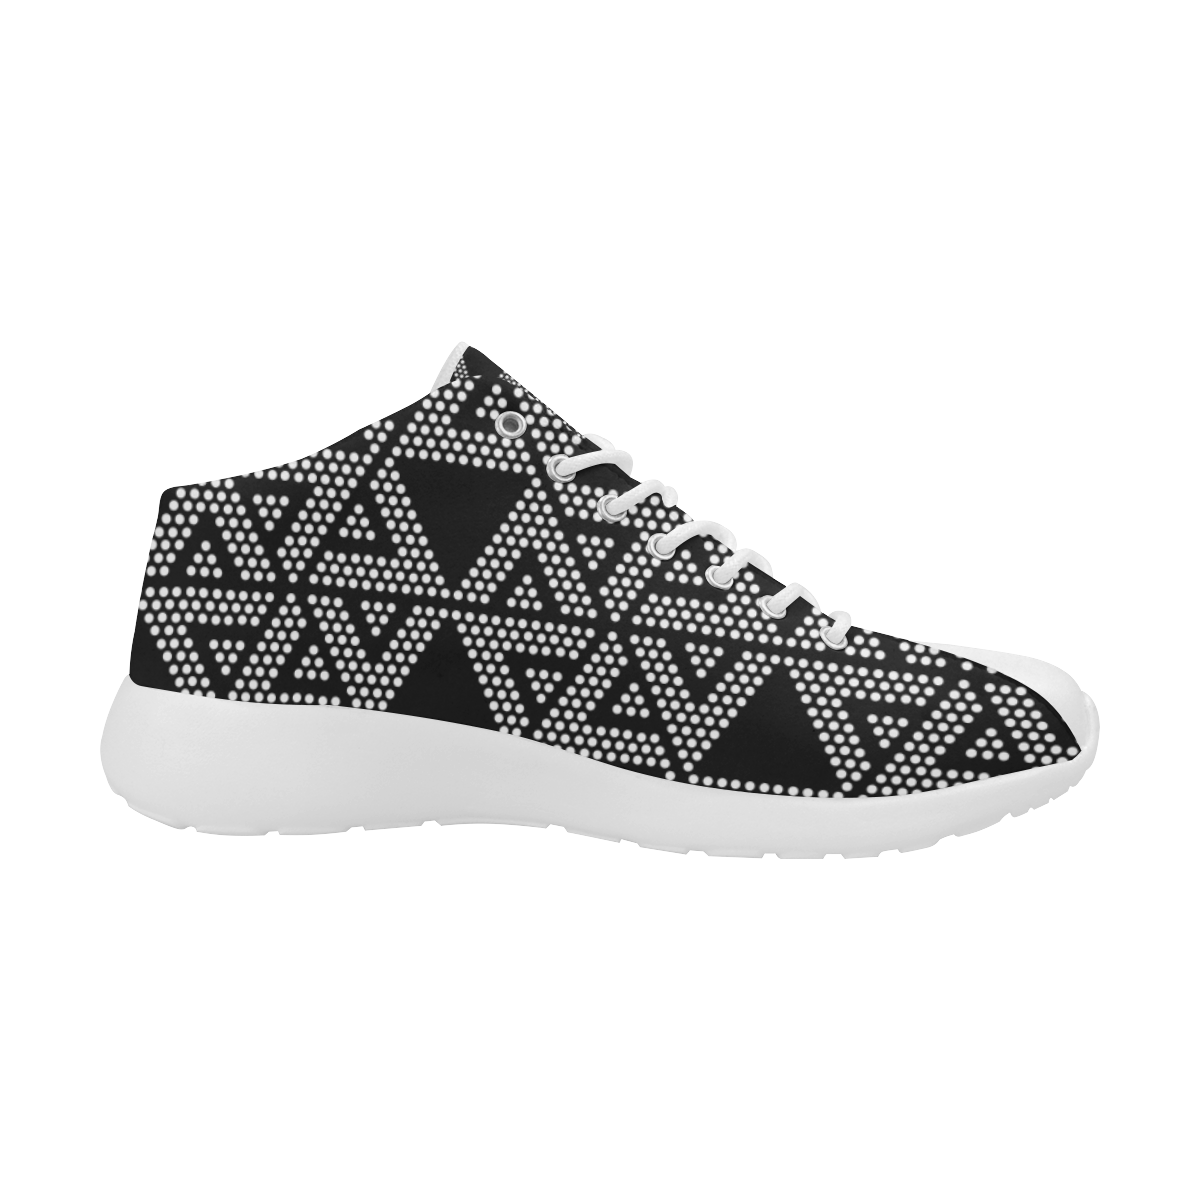 Polka Dots Party Women's Basketball Training Shoes/Large Size (Model 47502)